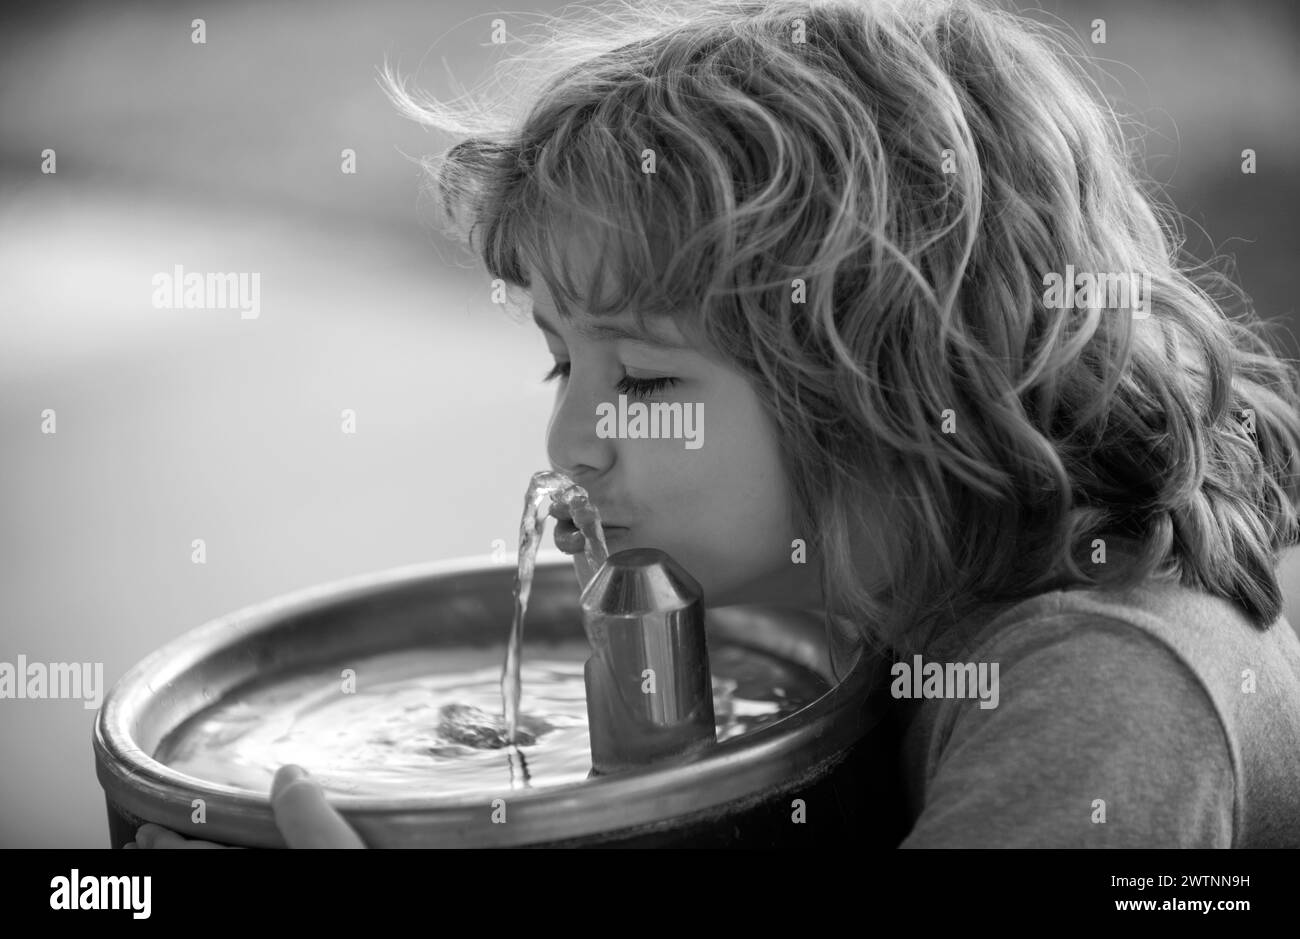 Child drinking water from outdoor water fountain outdoor. Stock Photo